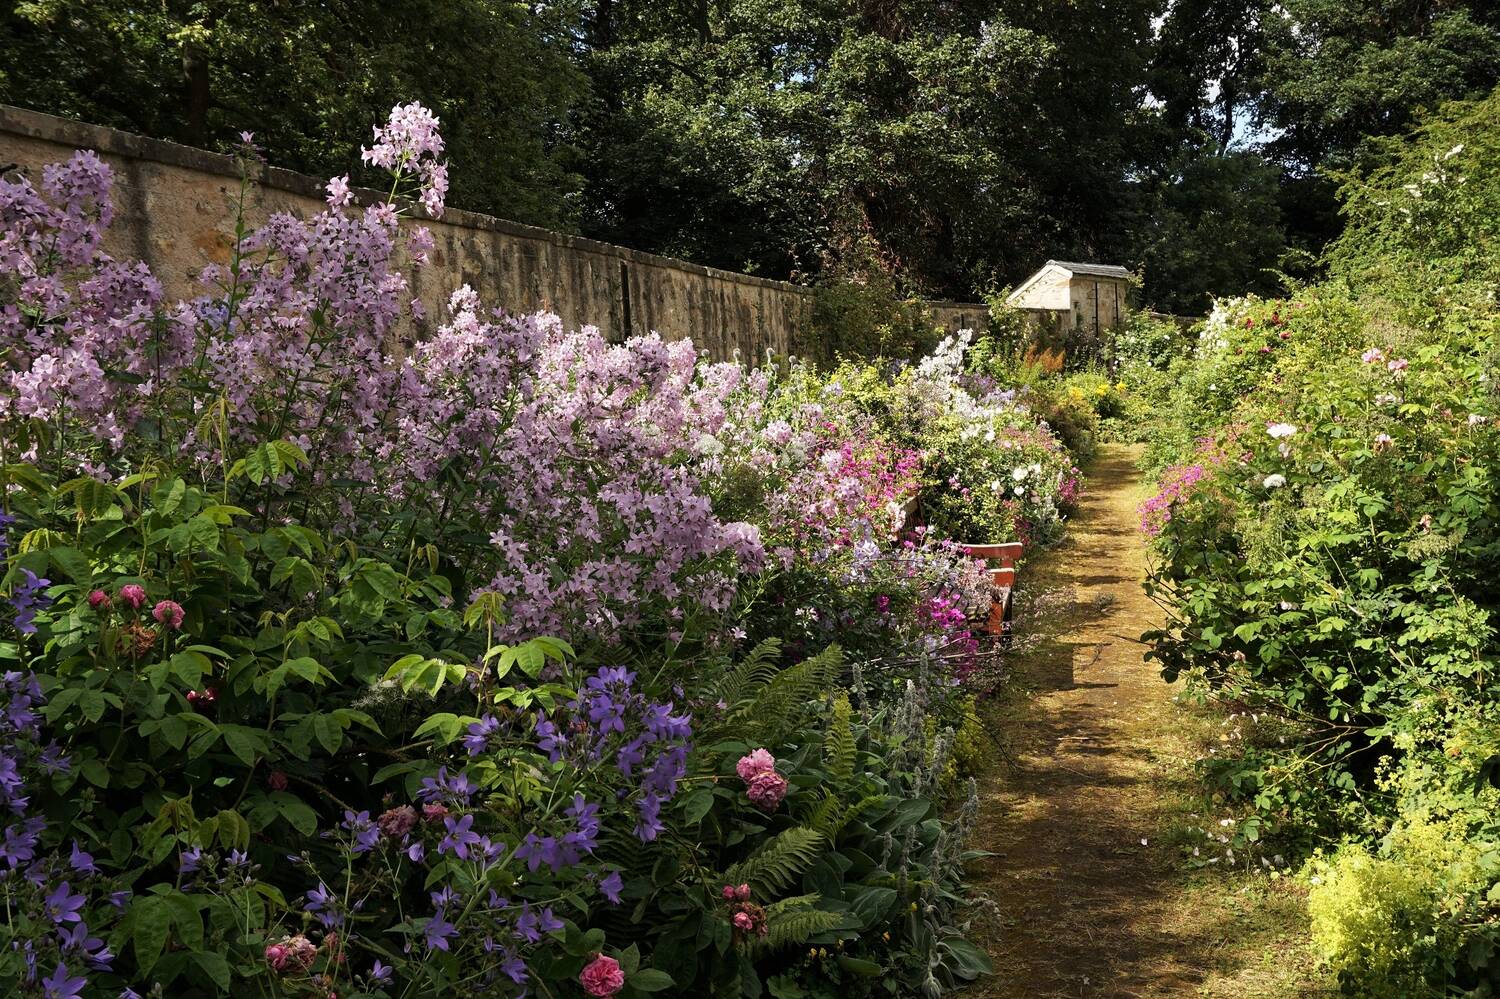 A view of a garden path, running beside a flower bed bursting with plants and colour! Lots of purple and pink flowers grow in the foreground. Running parallel to the path is a tall stone garden wall.